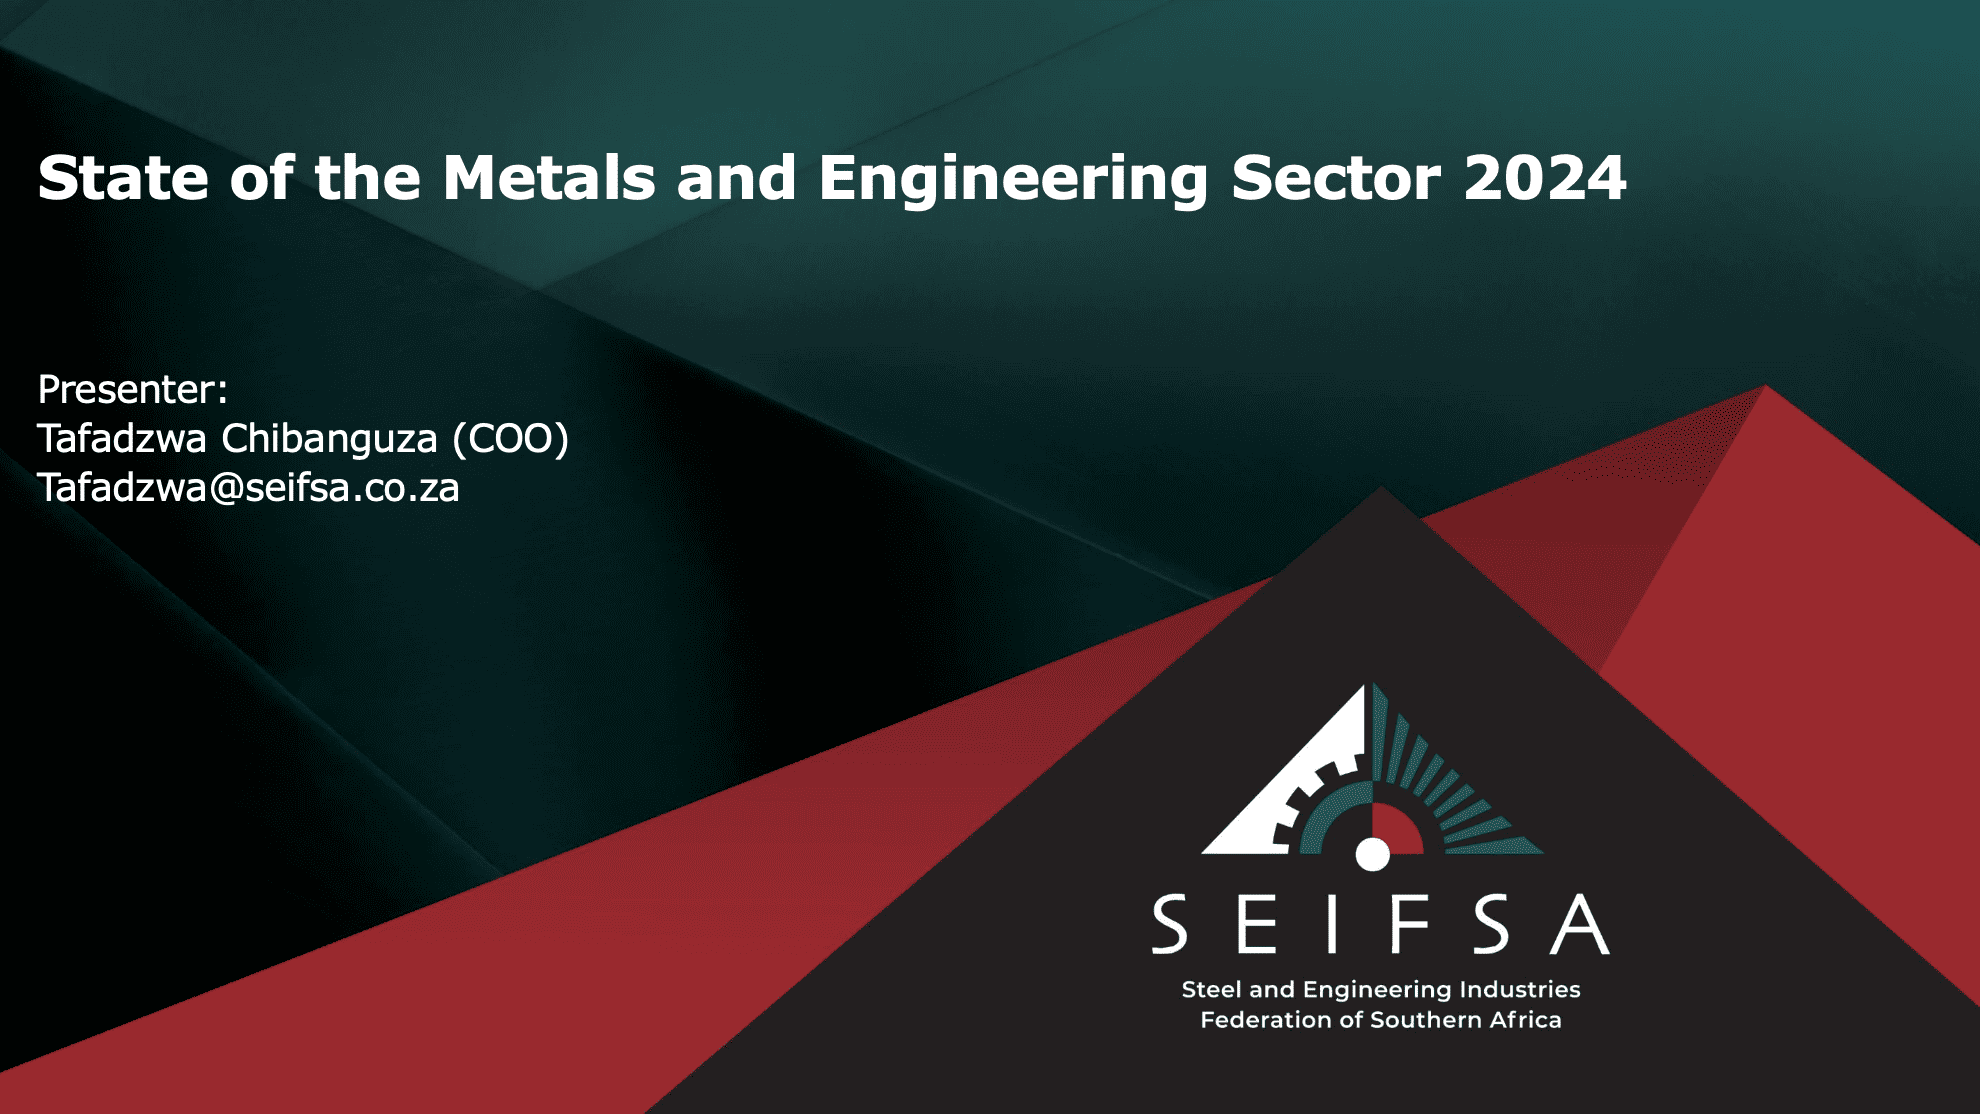 SEIFSA Outlines Logistics, Transnet, Load Shedding And Geopolitics As Risks For Local Metals & Engineering Sector In 2024